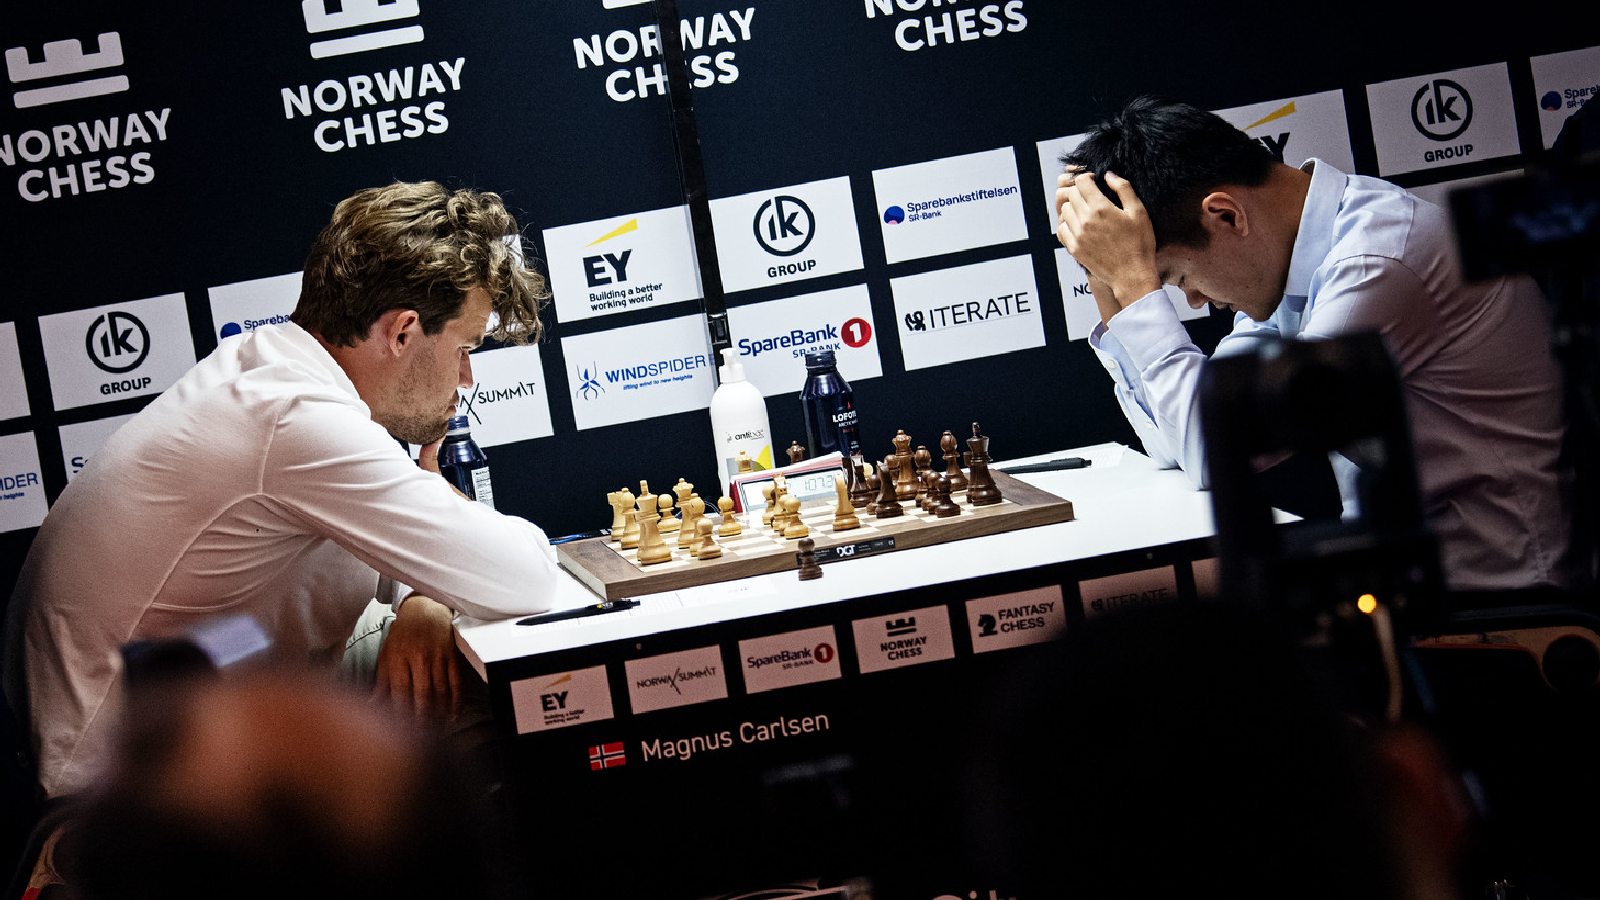 Mate-in-2: Ding Liren blunders against Magnus Carlsen to lose 4th game in row at Norway Chess